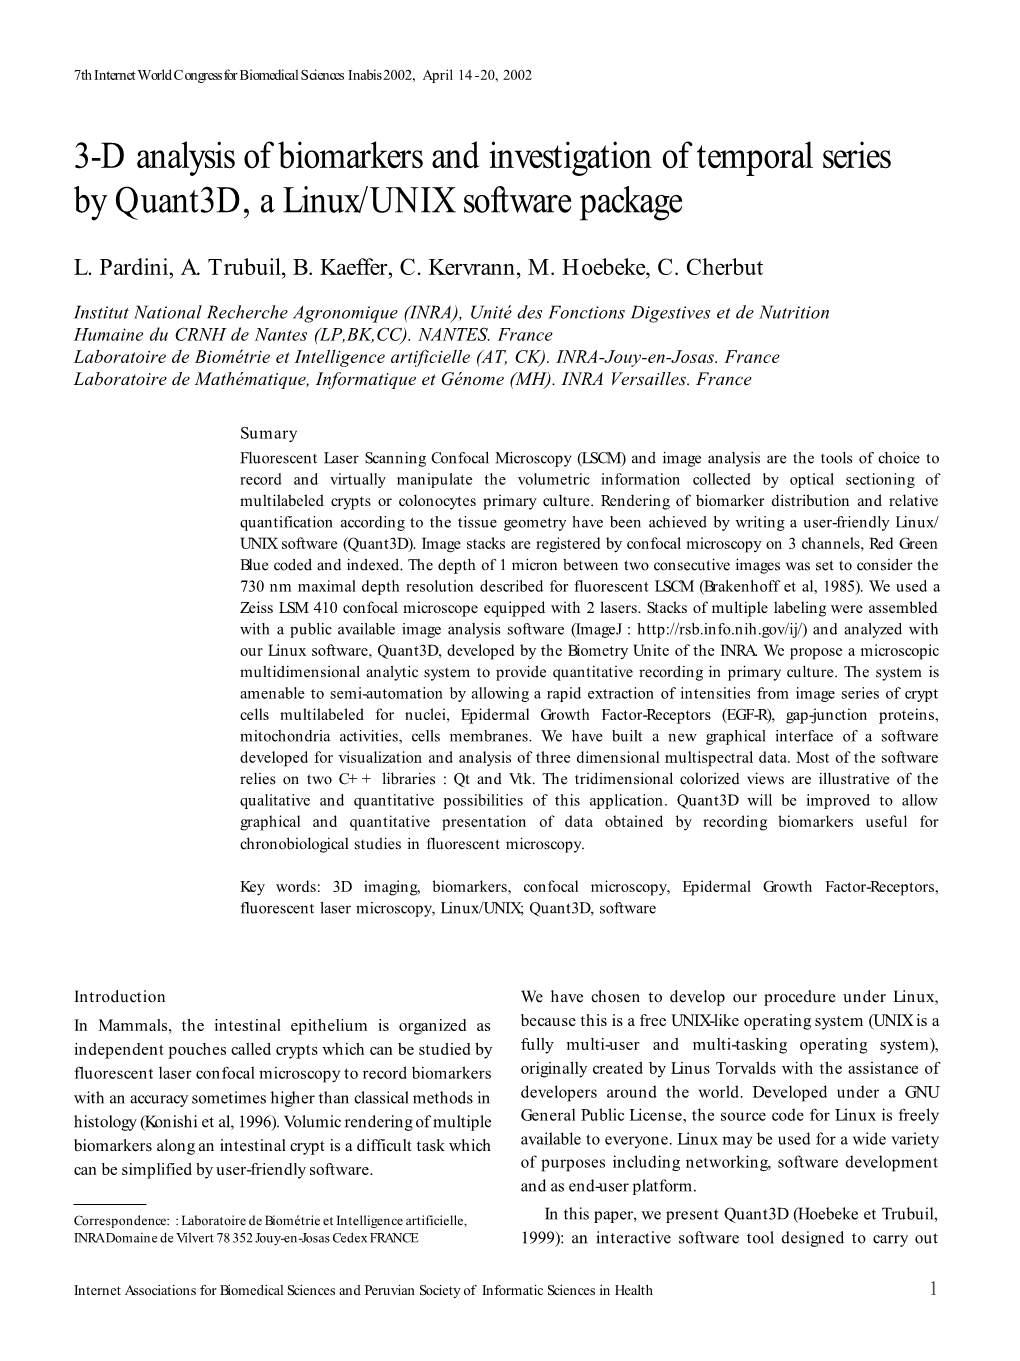 3-D Analysis of Biomarkers and Investigation of Temporal Series by Quant3d, a Linux/UNIX Software Package